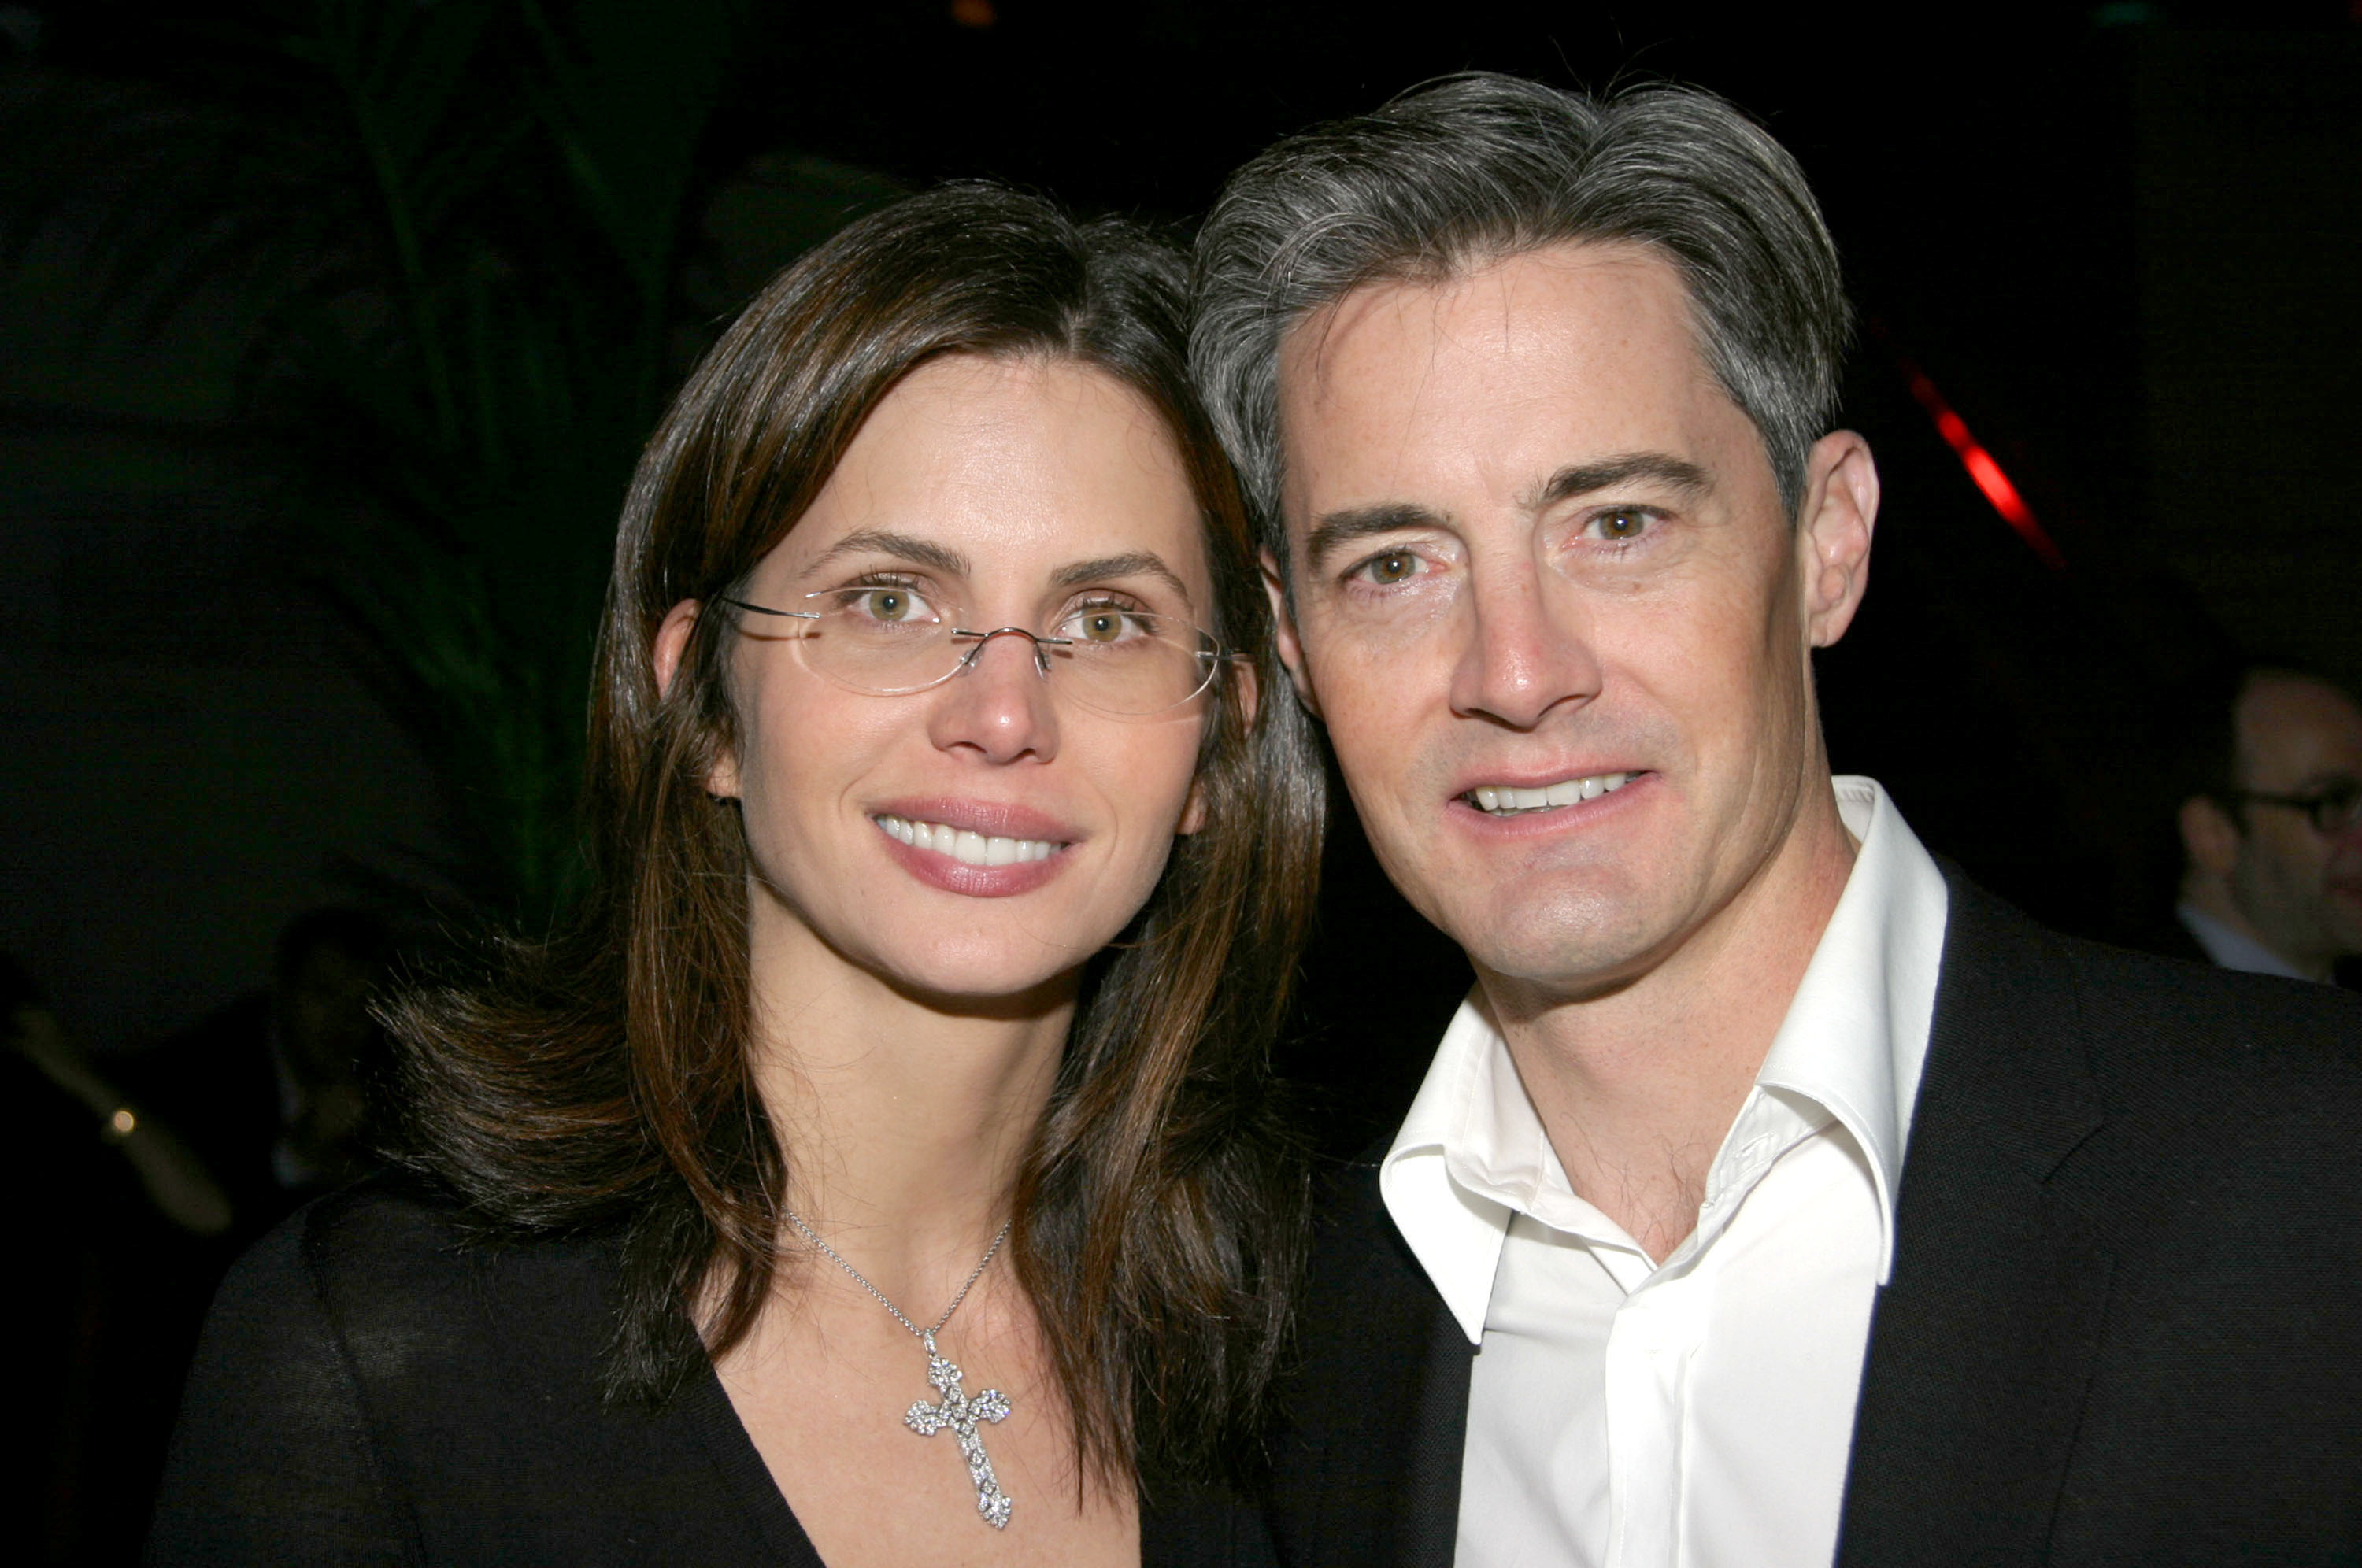 Desiree Gruber and Kyle MacLachlan at the opening night of "The Caretaker" in New York City in 2003. | Source: Getty Images